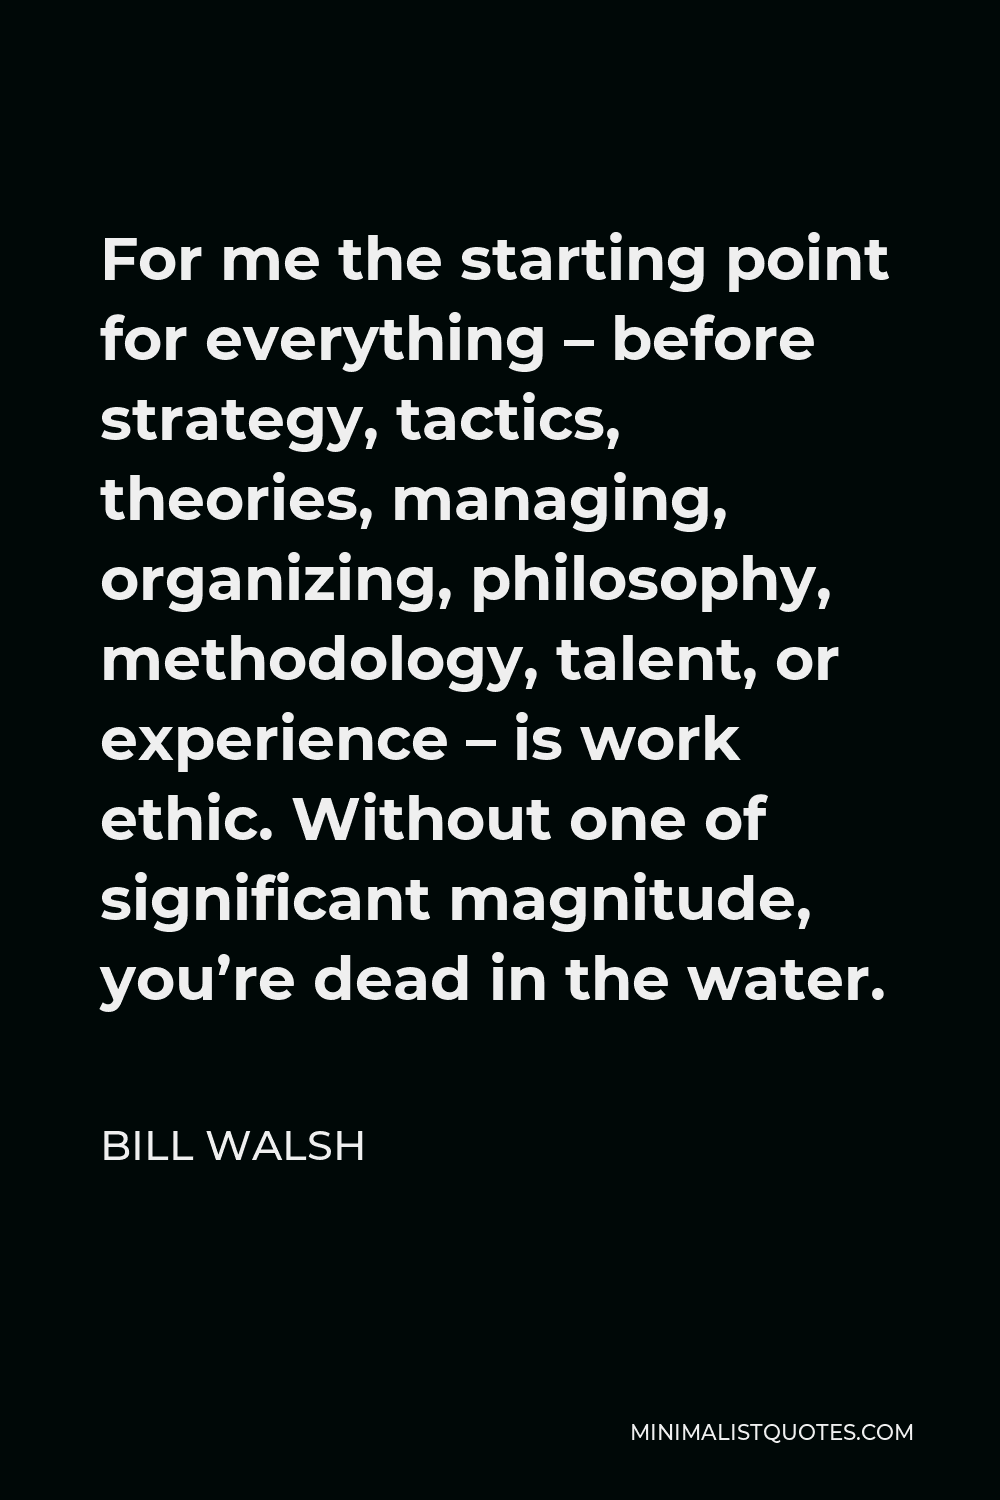 Bill Walsh Quote - For me the starting point for everything – before strategy, tactics, theories, managing, organizing, philosophy, methodology, talent, or experience – is work ethic. Without one of significant magnitude, you’re dead in the water.